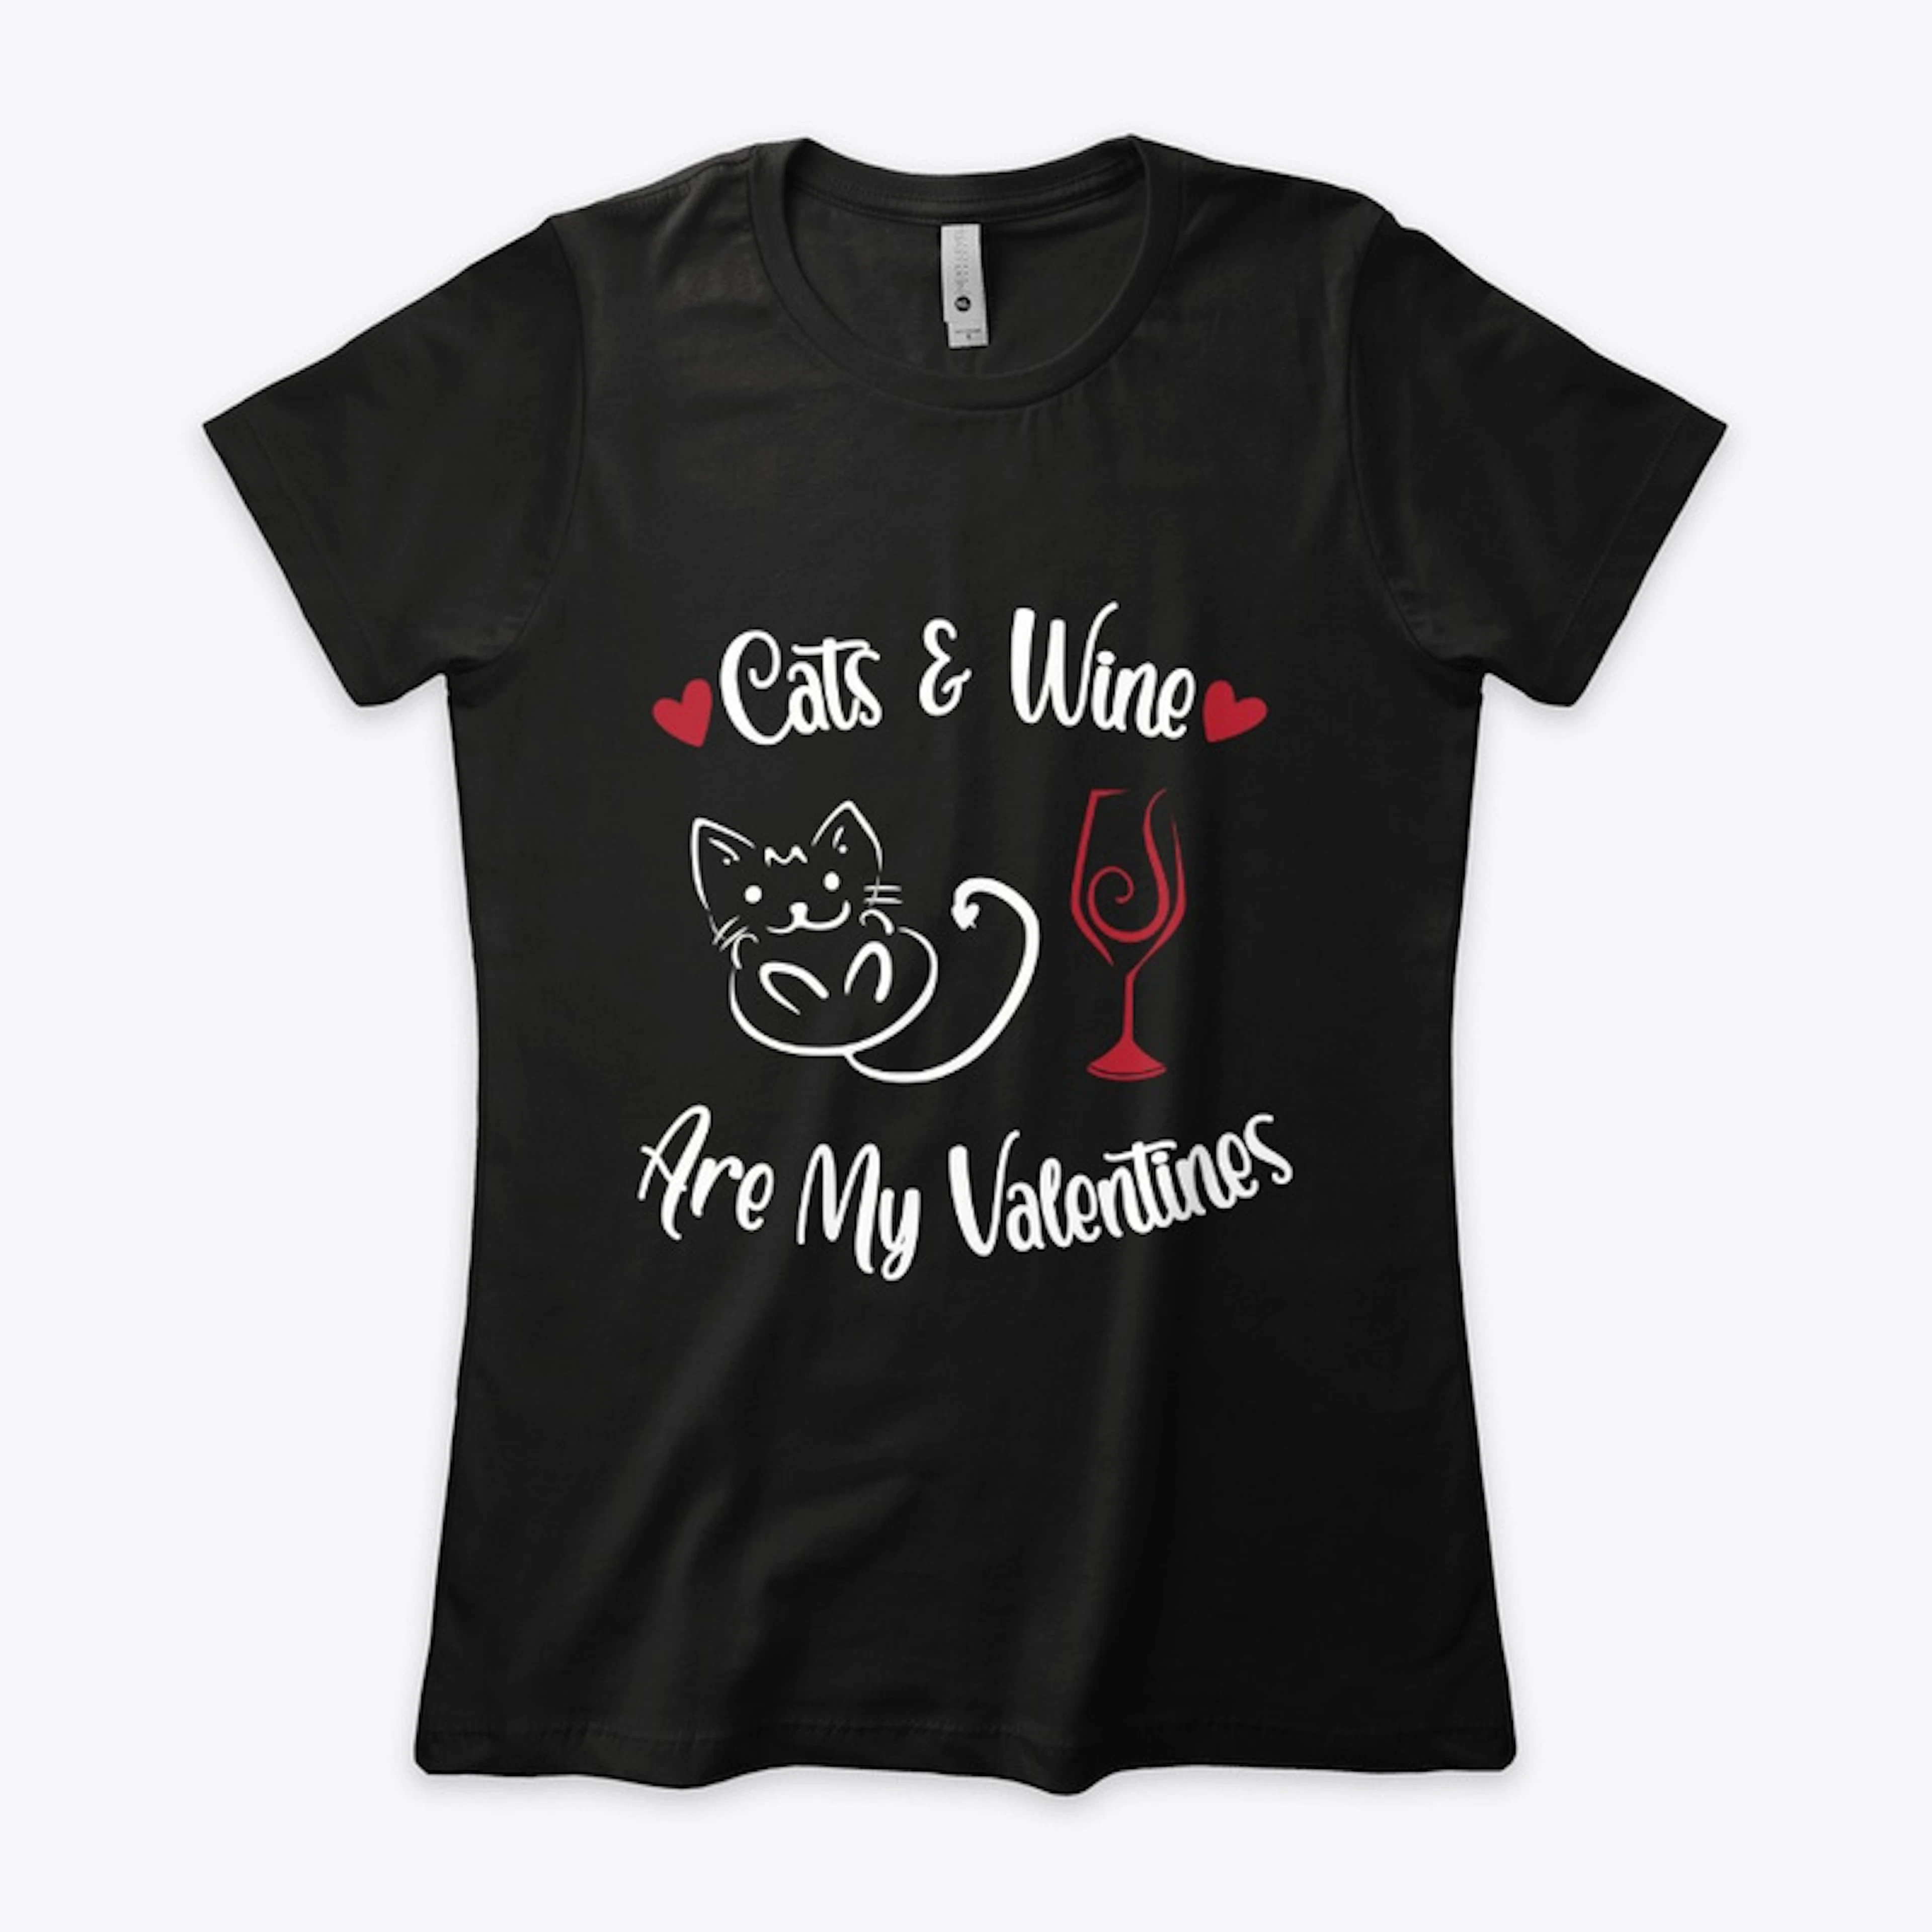 Cats & Wine Are My Valentines - Hearts